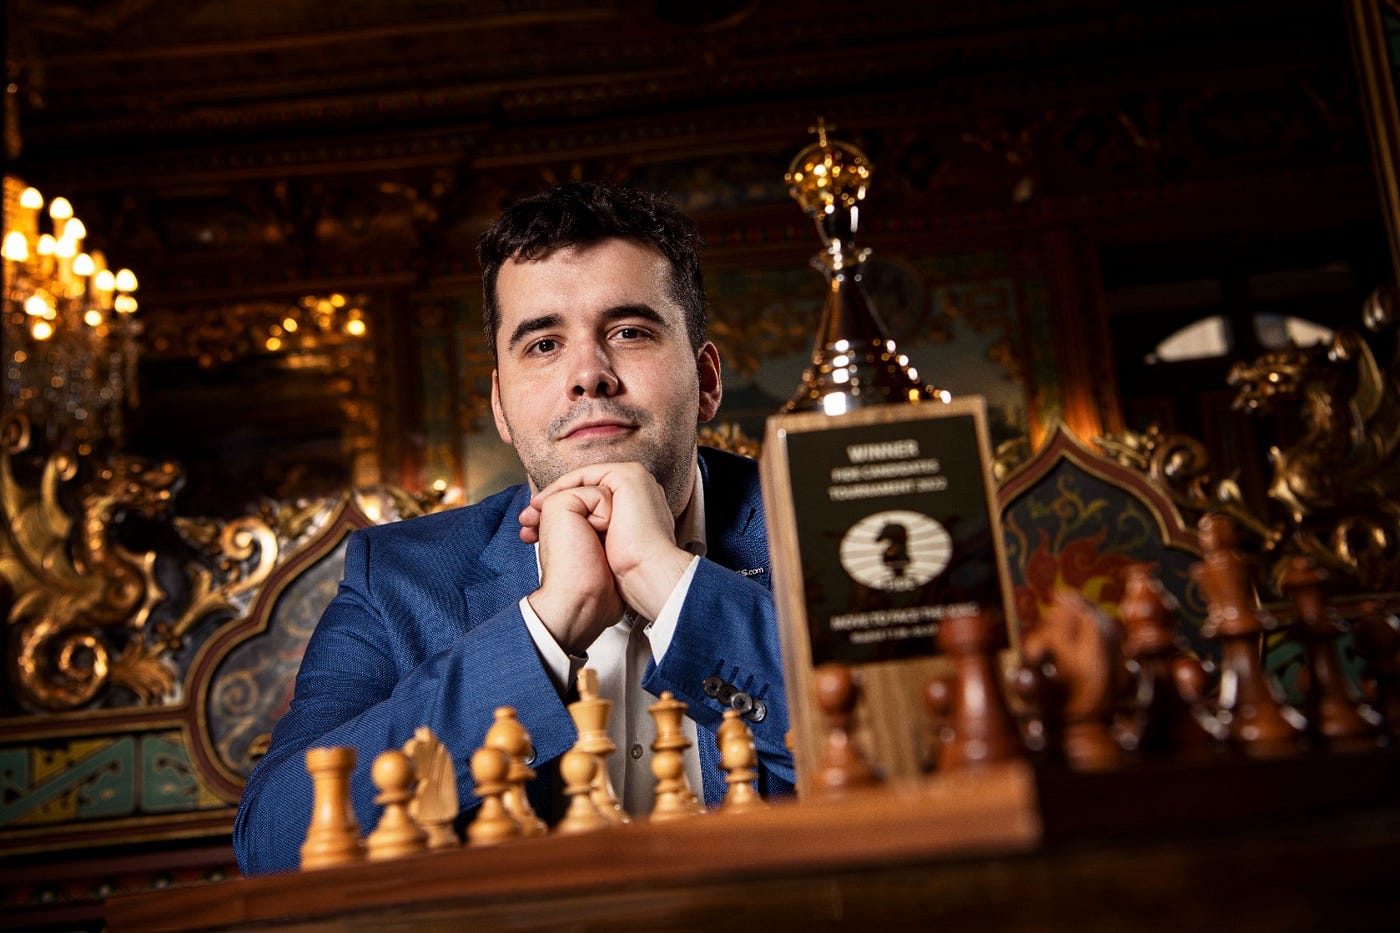 FIDE Grand Prix 2022: Qualifying for the Candidates Tournament